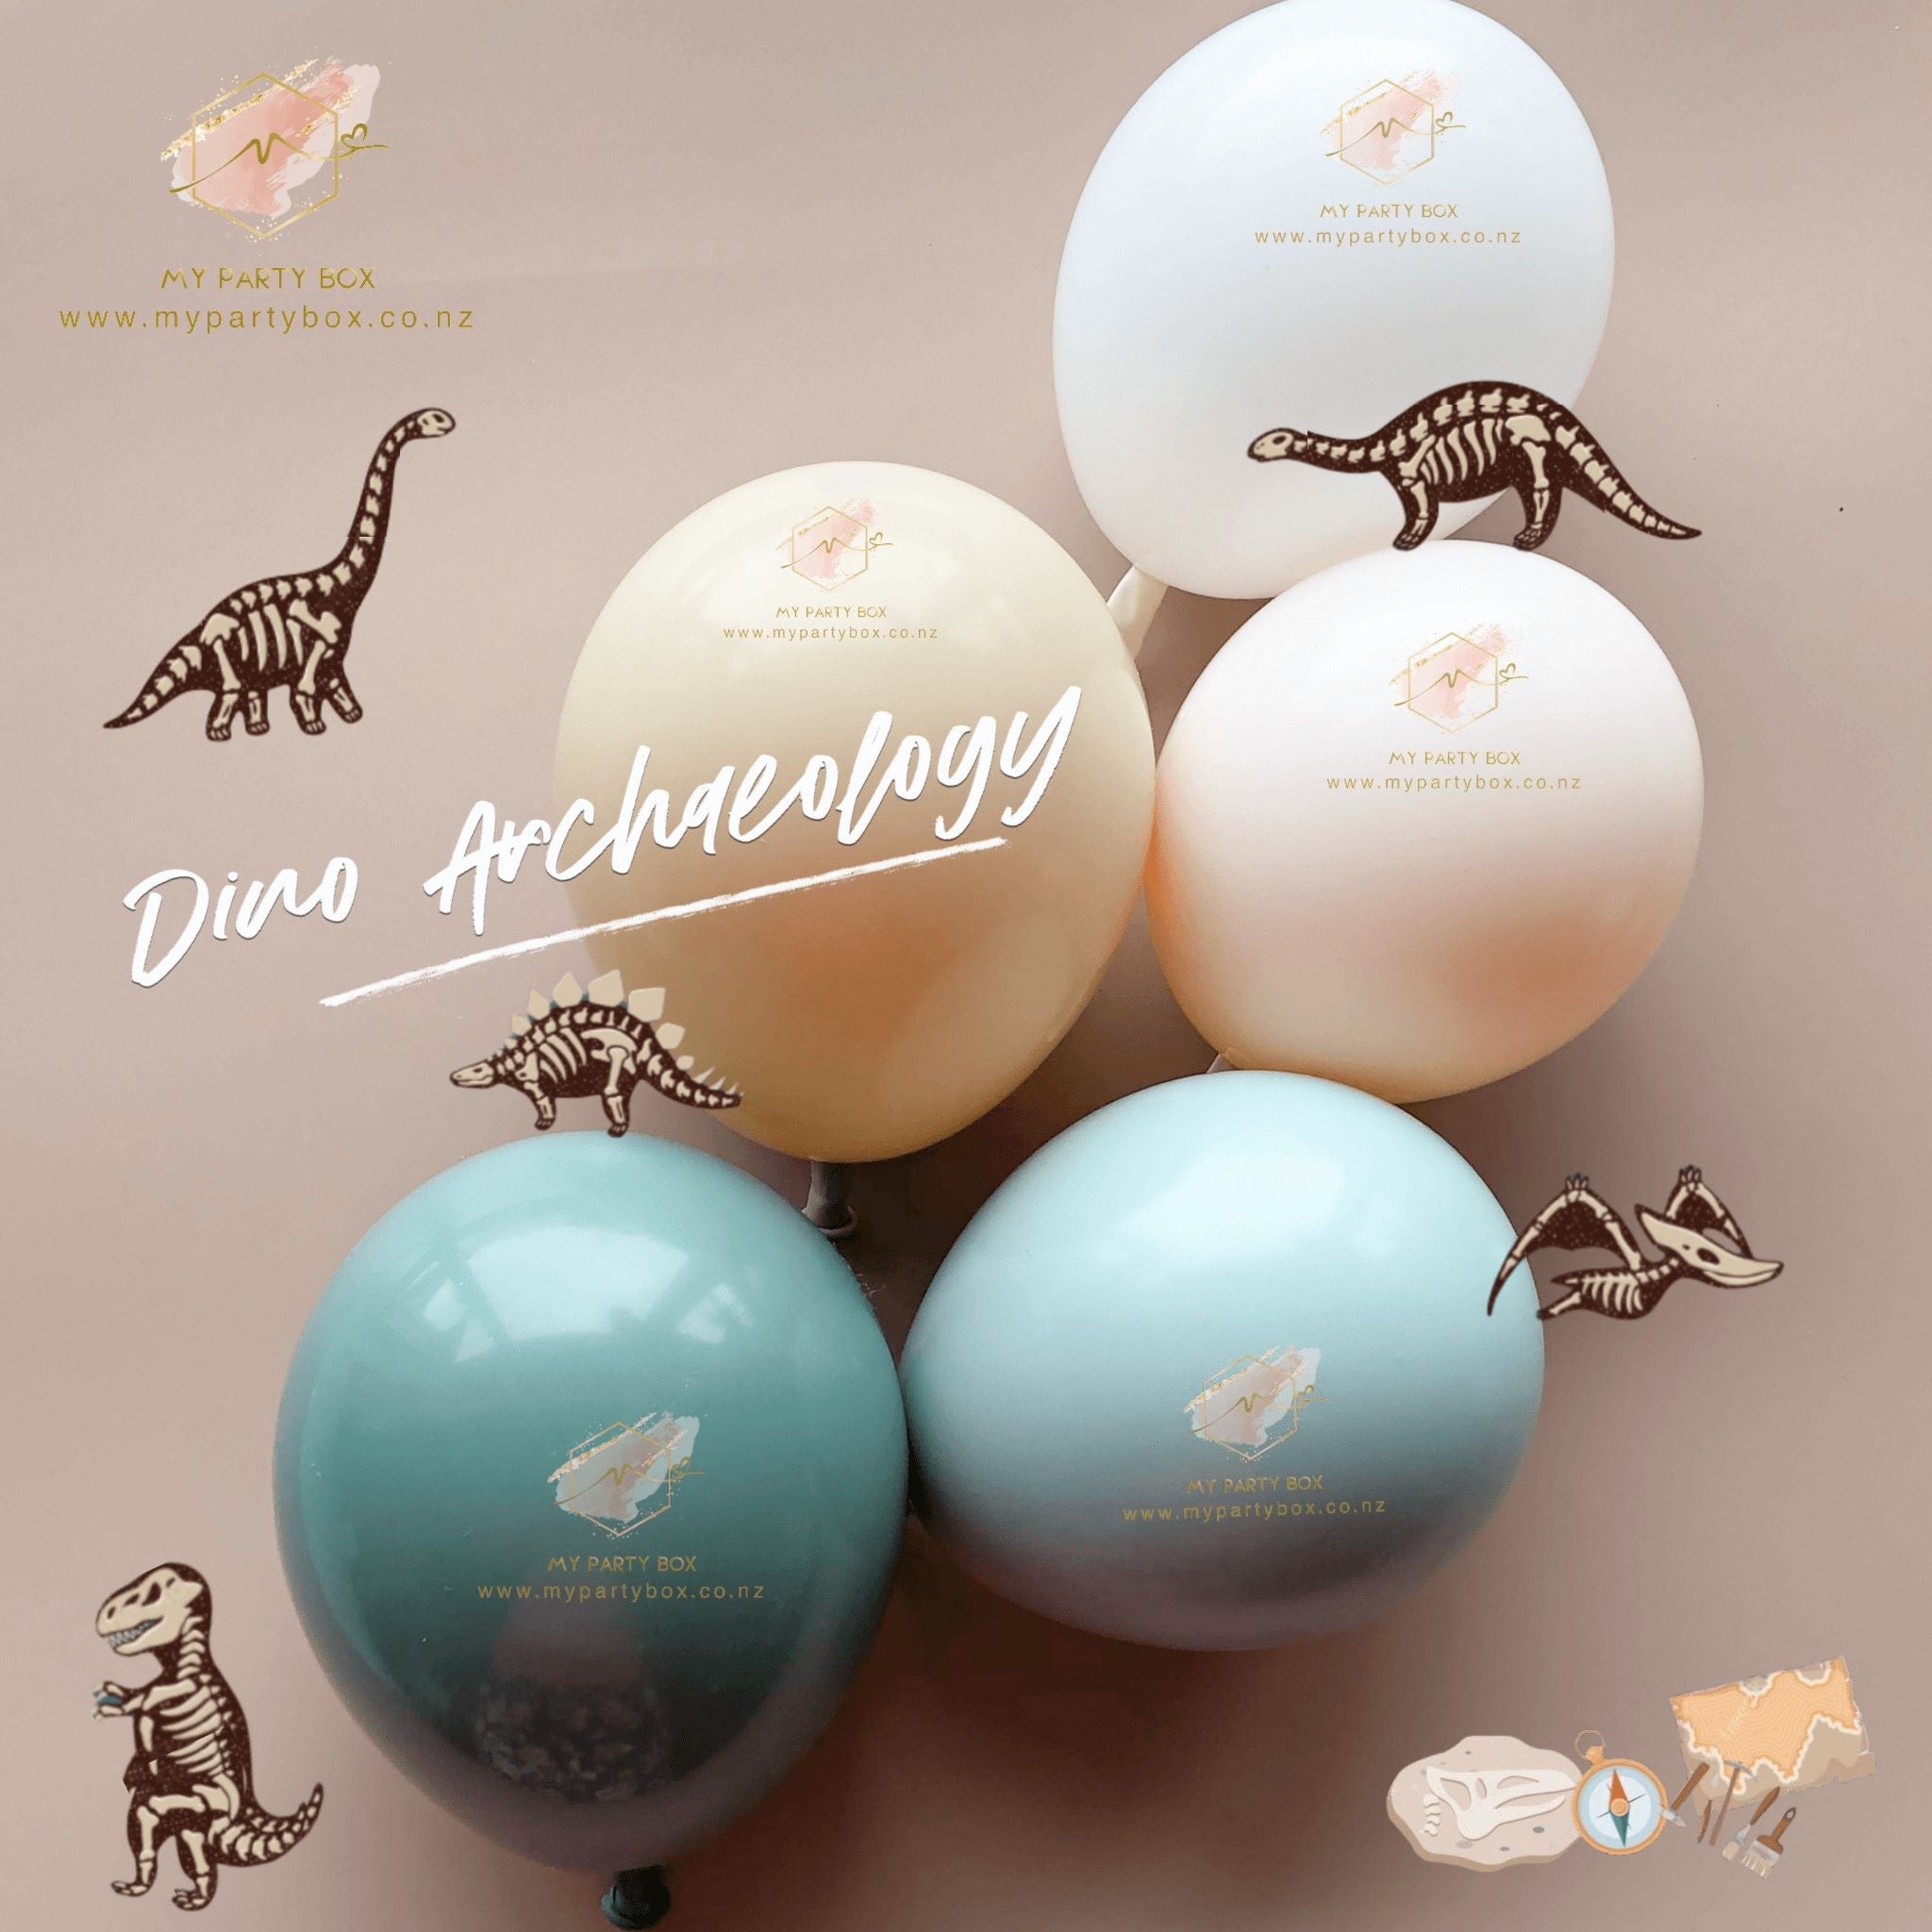 My Party box Luxe Dino Archaeology Balloon Garland DIY Kit with willow, mintgreen, white sand, blush chalk and white latex balloon